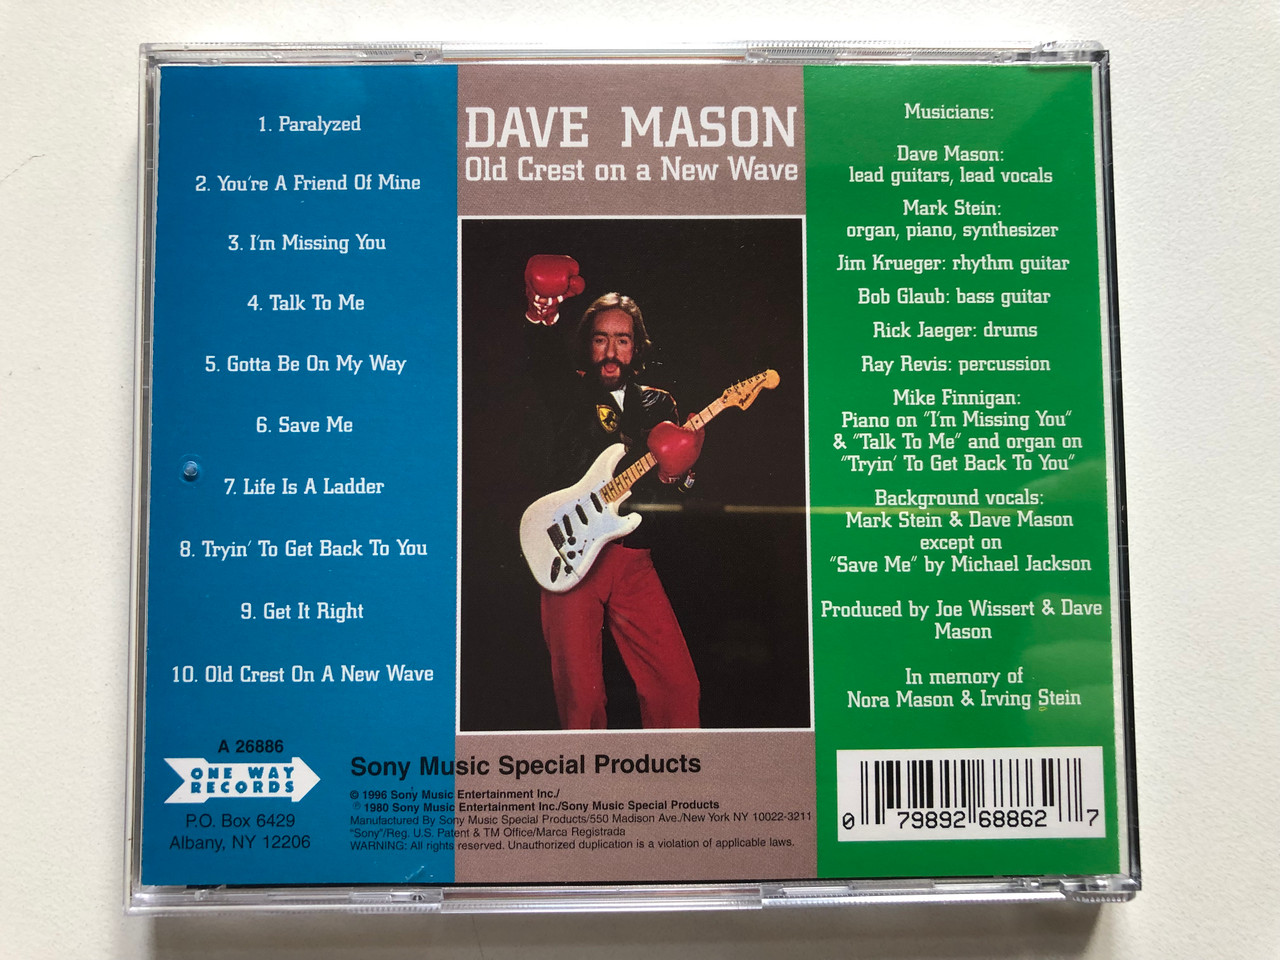 https://cdn10.bigcommerce.com/s-62bdpkt7pb/products/0/images/307629/Dave_Mason_Old_Crest_On_A_New_Wave_One_Way_Records_Audio_CD_1996_A_26886_2__55842.1698765979.1280.1280.JPG?c=2